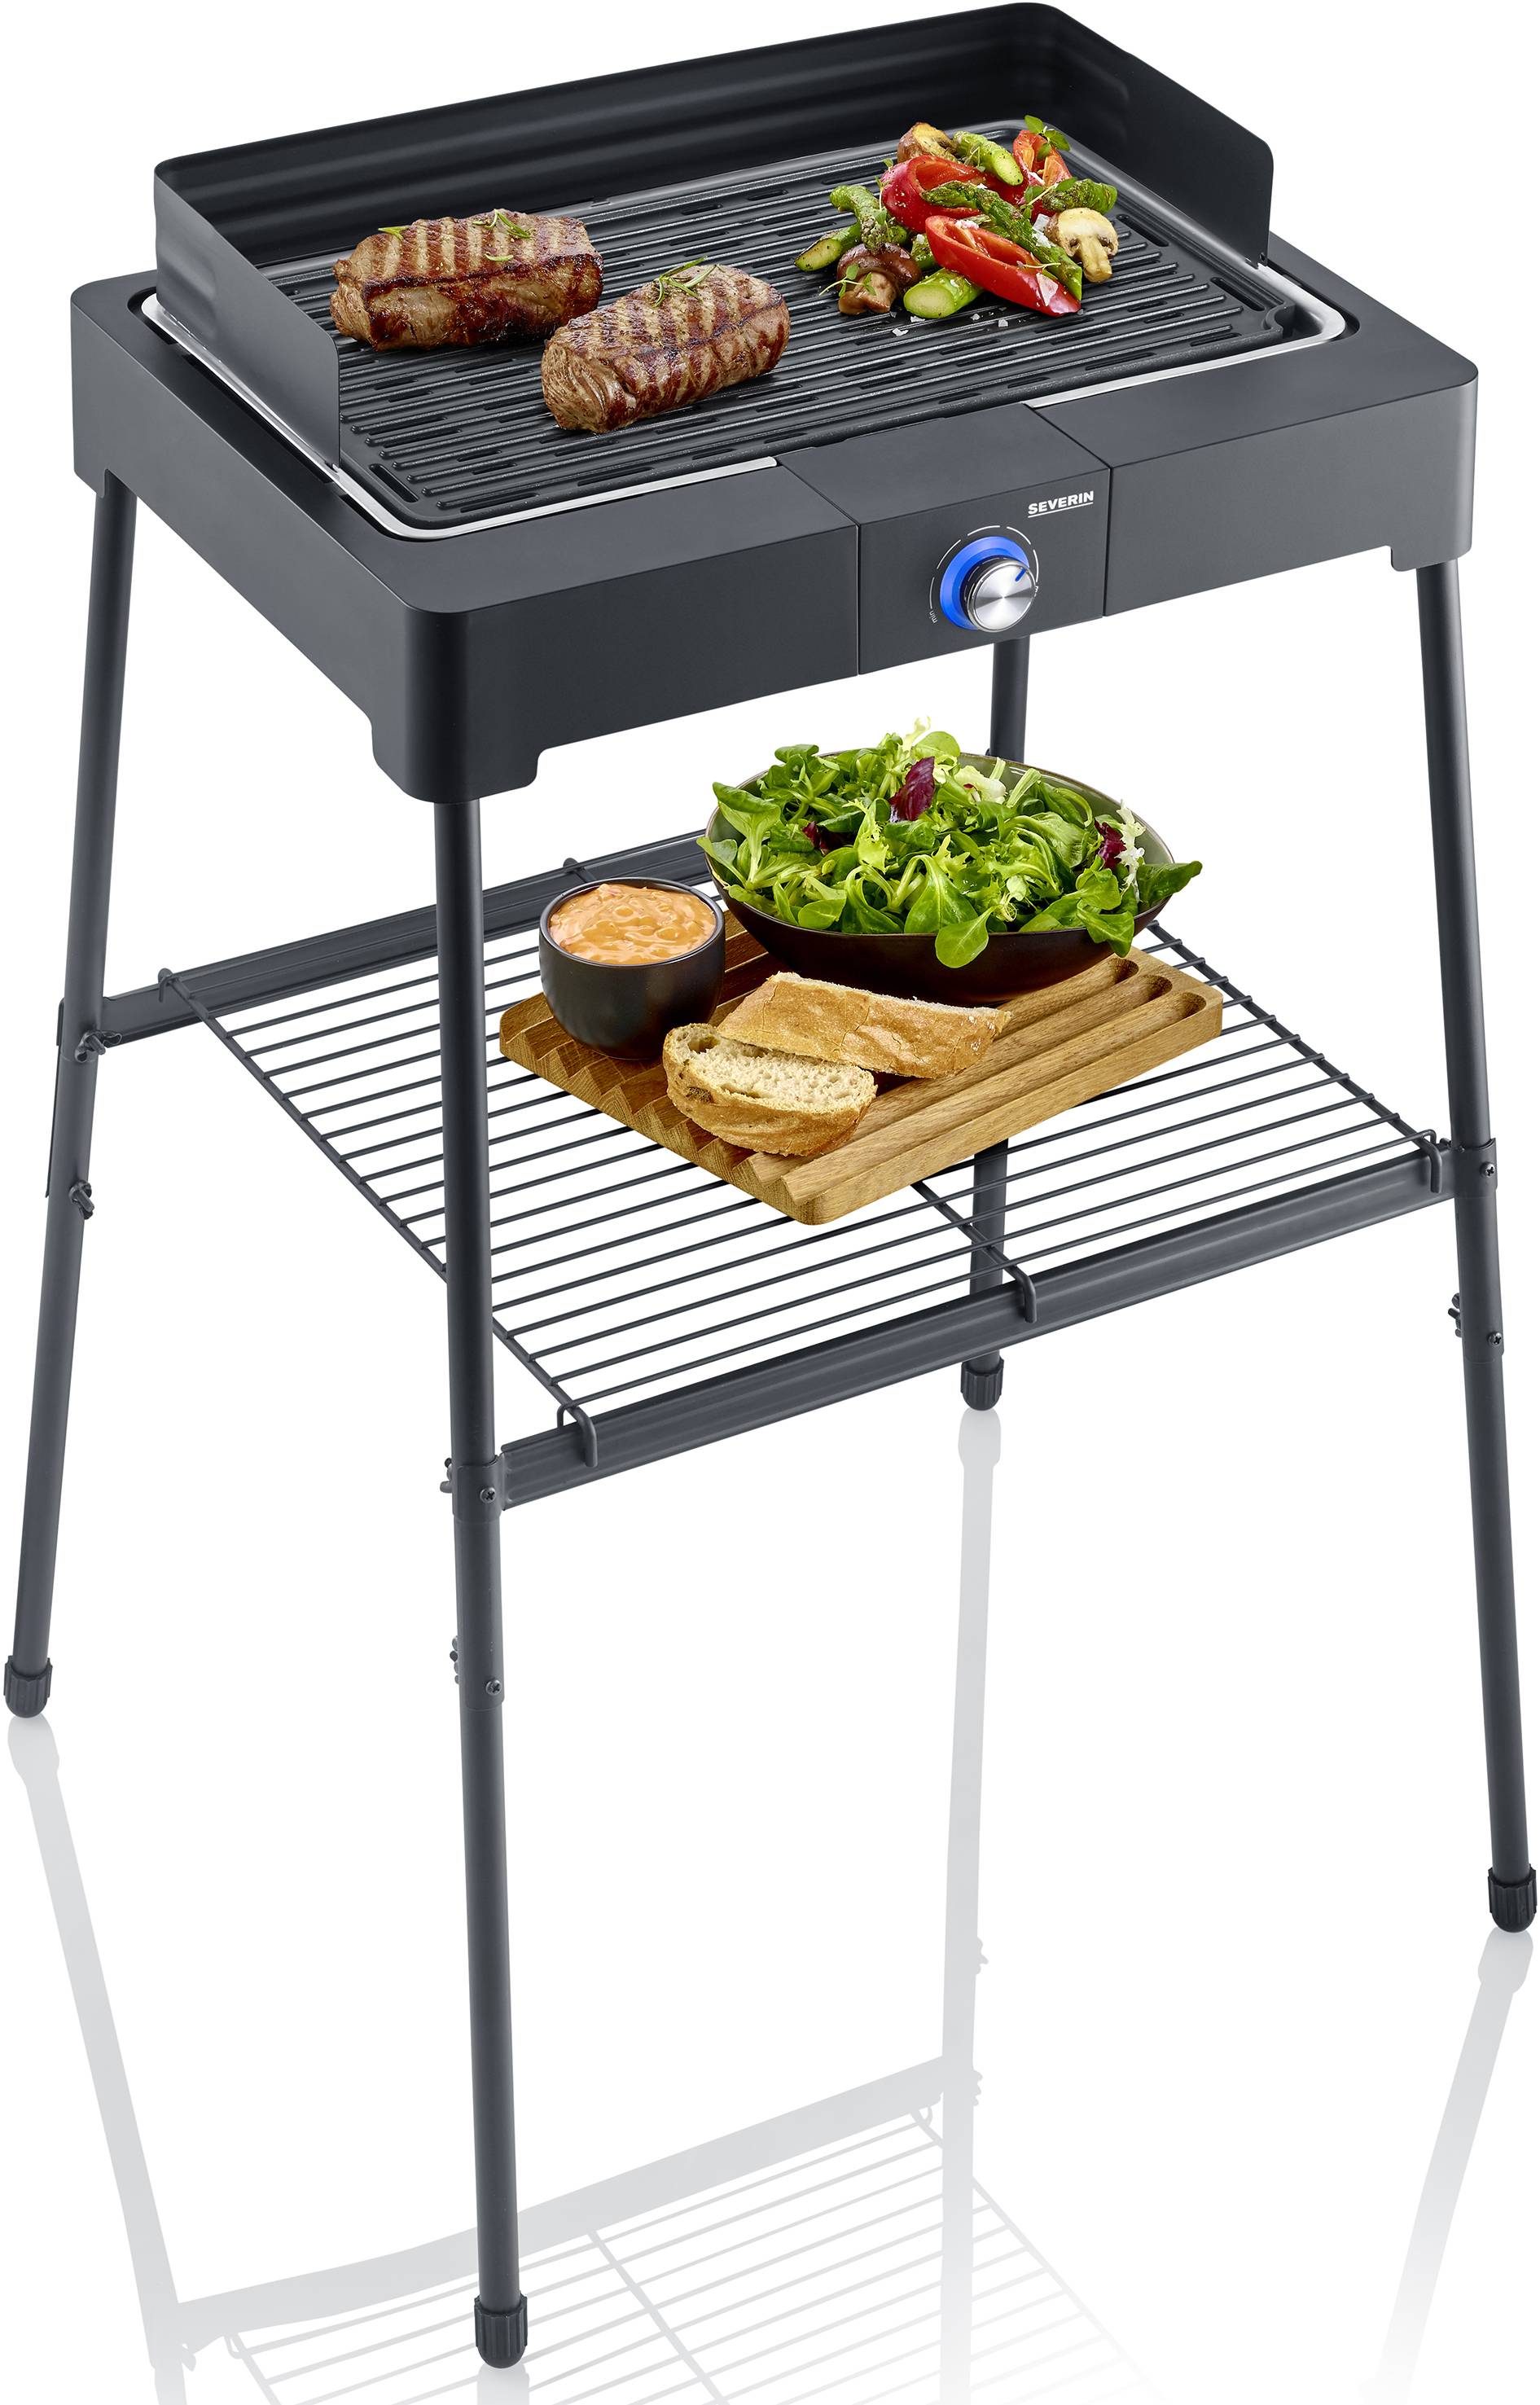 SEVERIN PG 8568 ELECTRIC STANDING GRILL WITH GRILL PLATE 2.2KW